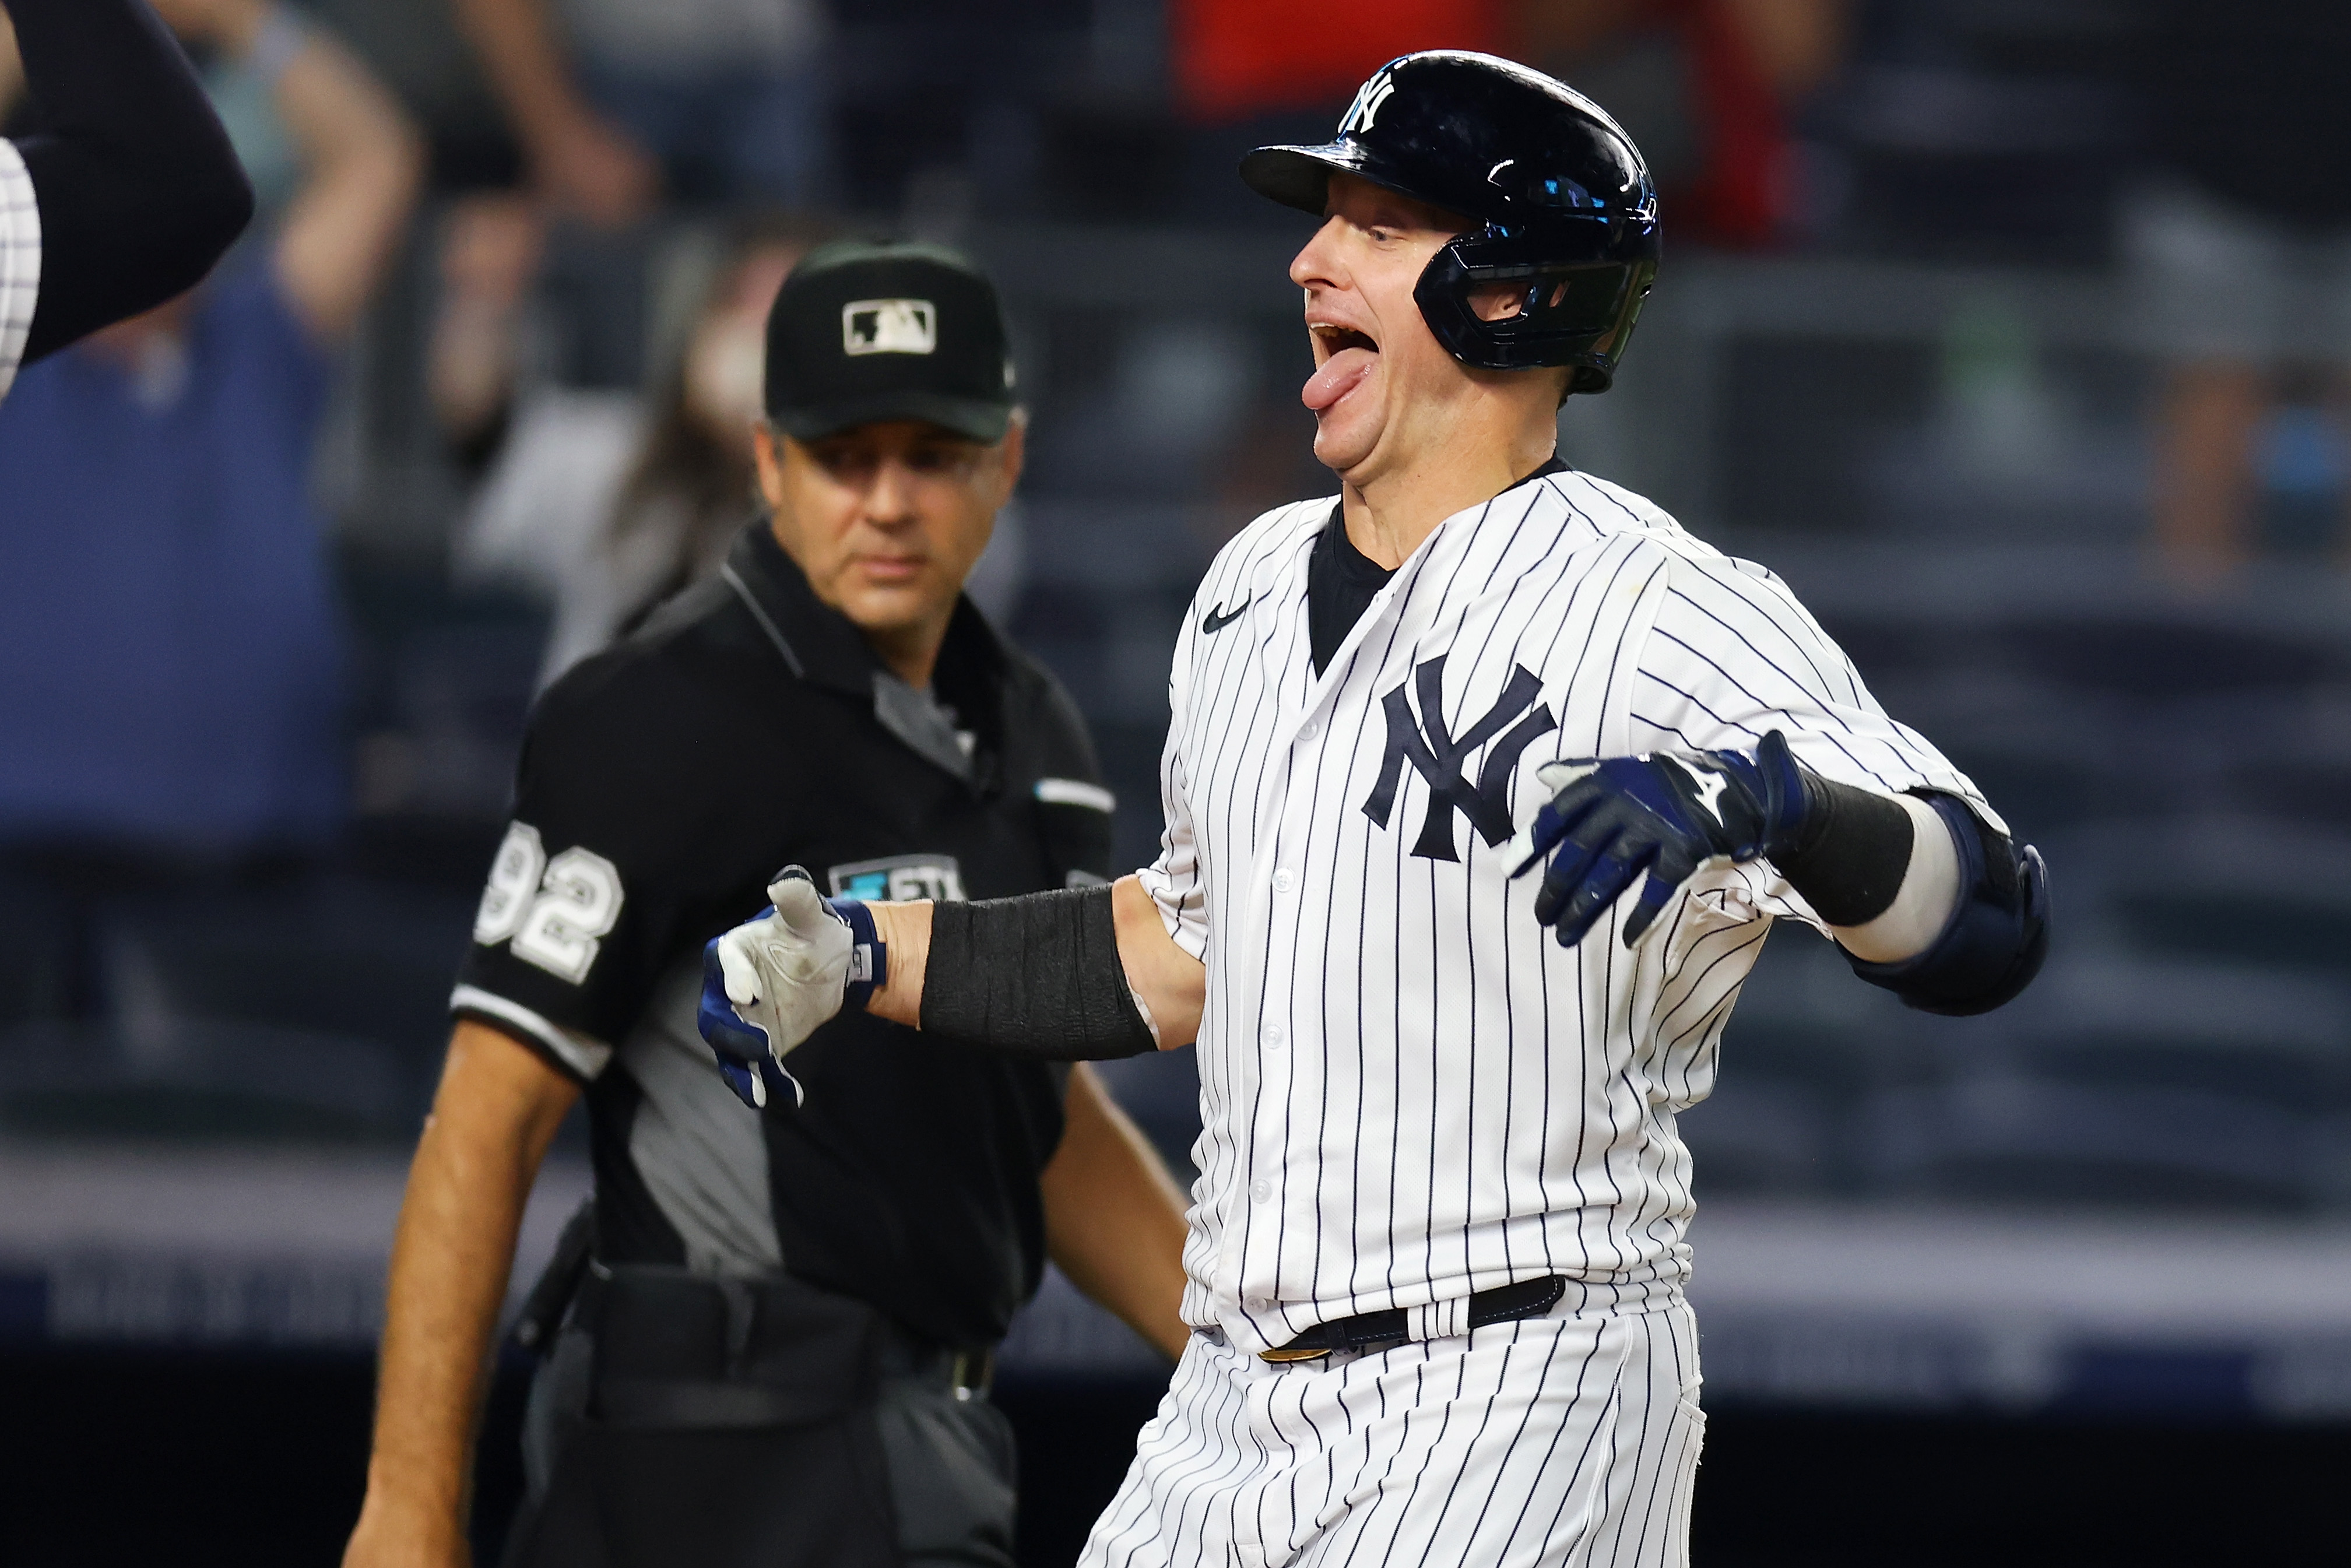 Opening Day: Josh Donaldson's walk-off single leads Yankees over Red Sox  6-5 in extras